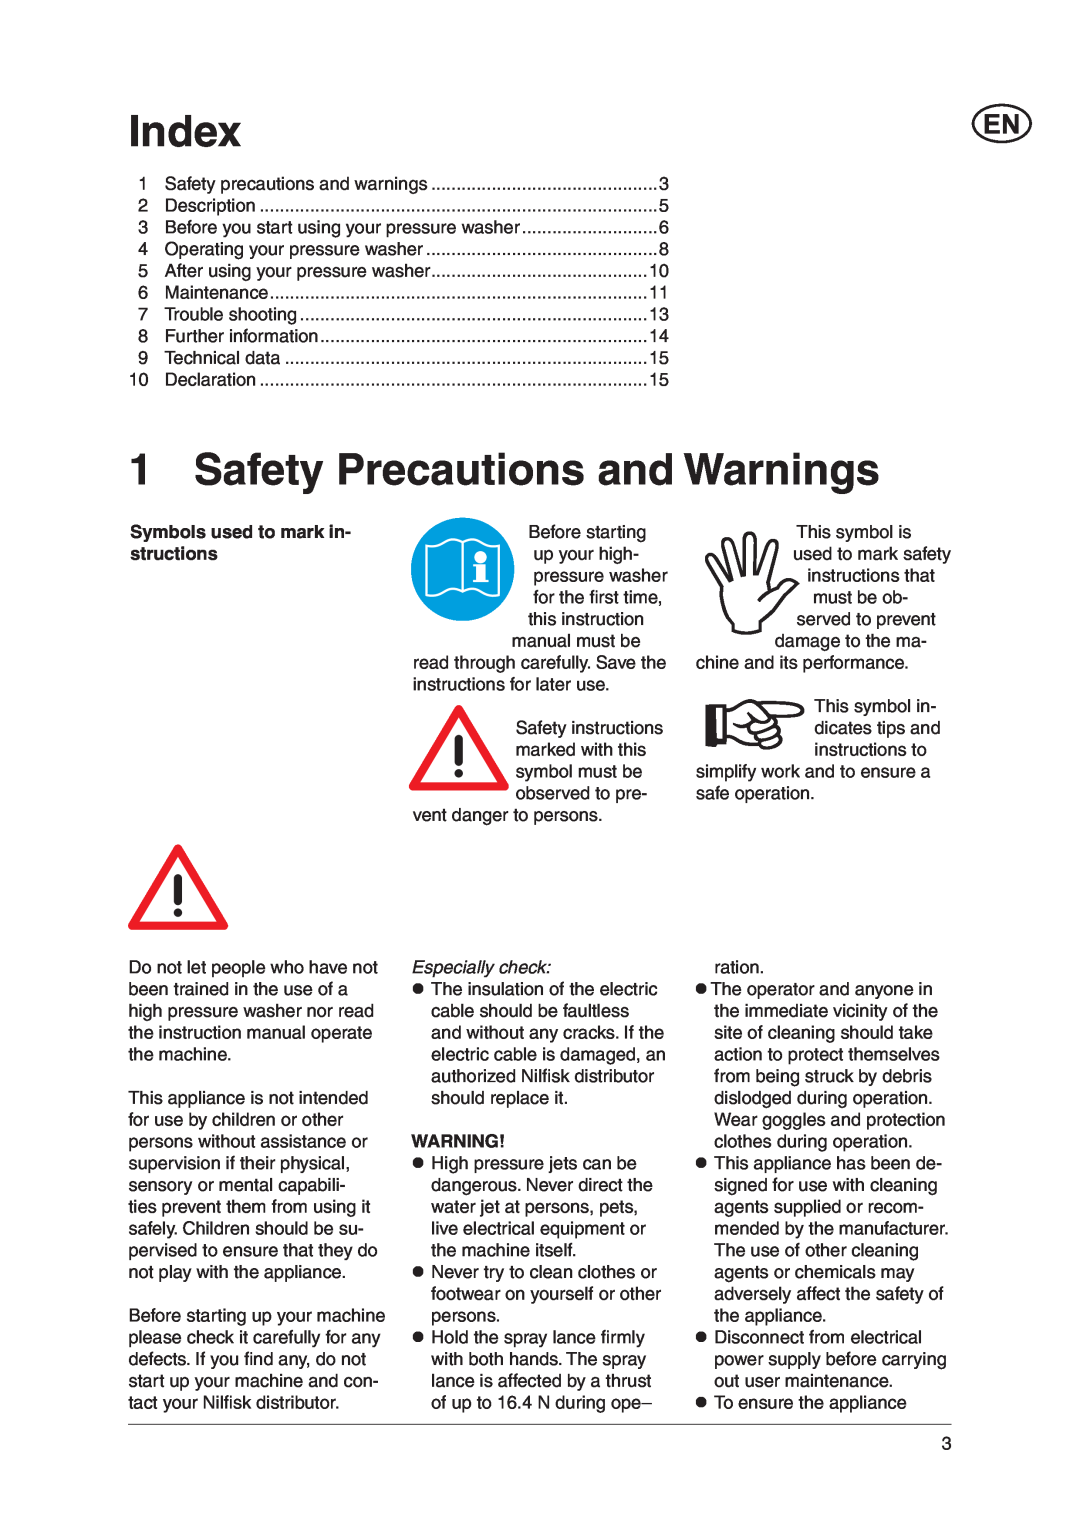 Nilfisk-ALTO C 110.2 X-TRA Index, Safety Precautions and Warnings, Symbols used to mark in, structions, Especially check 